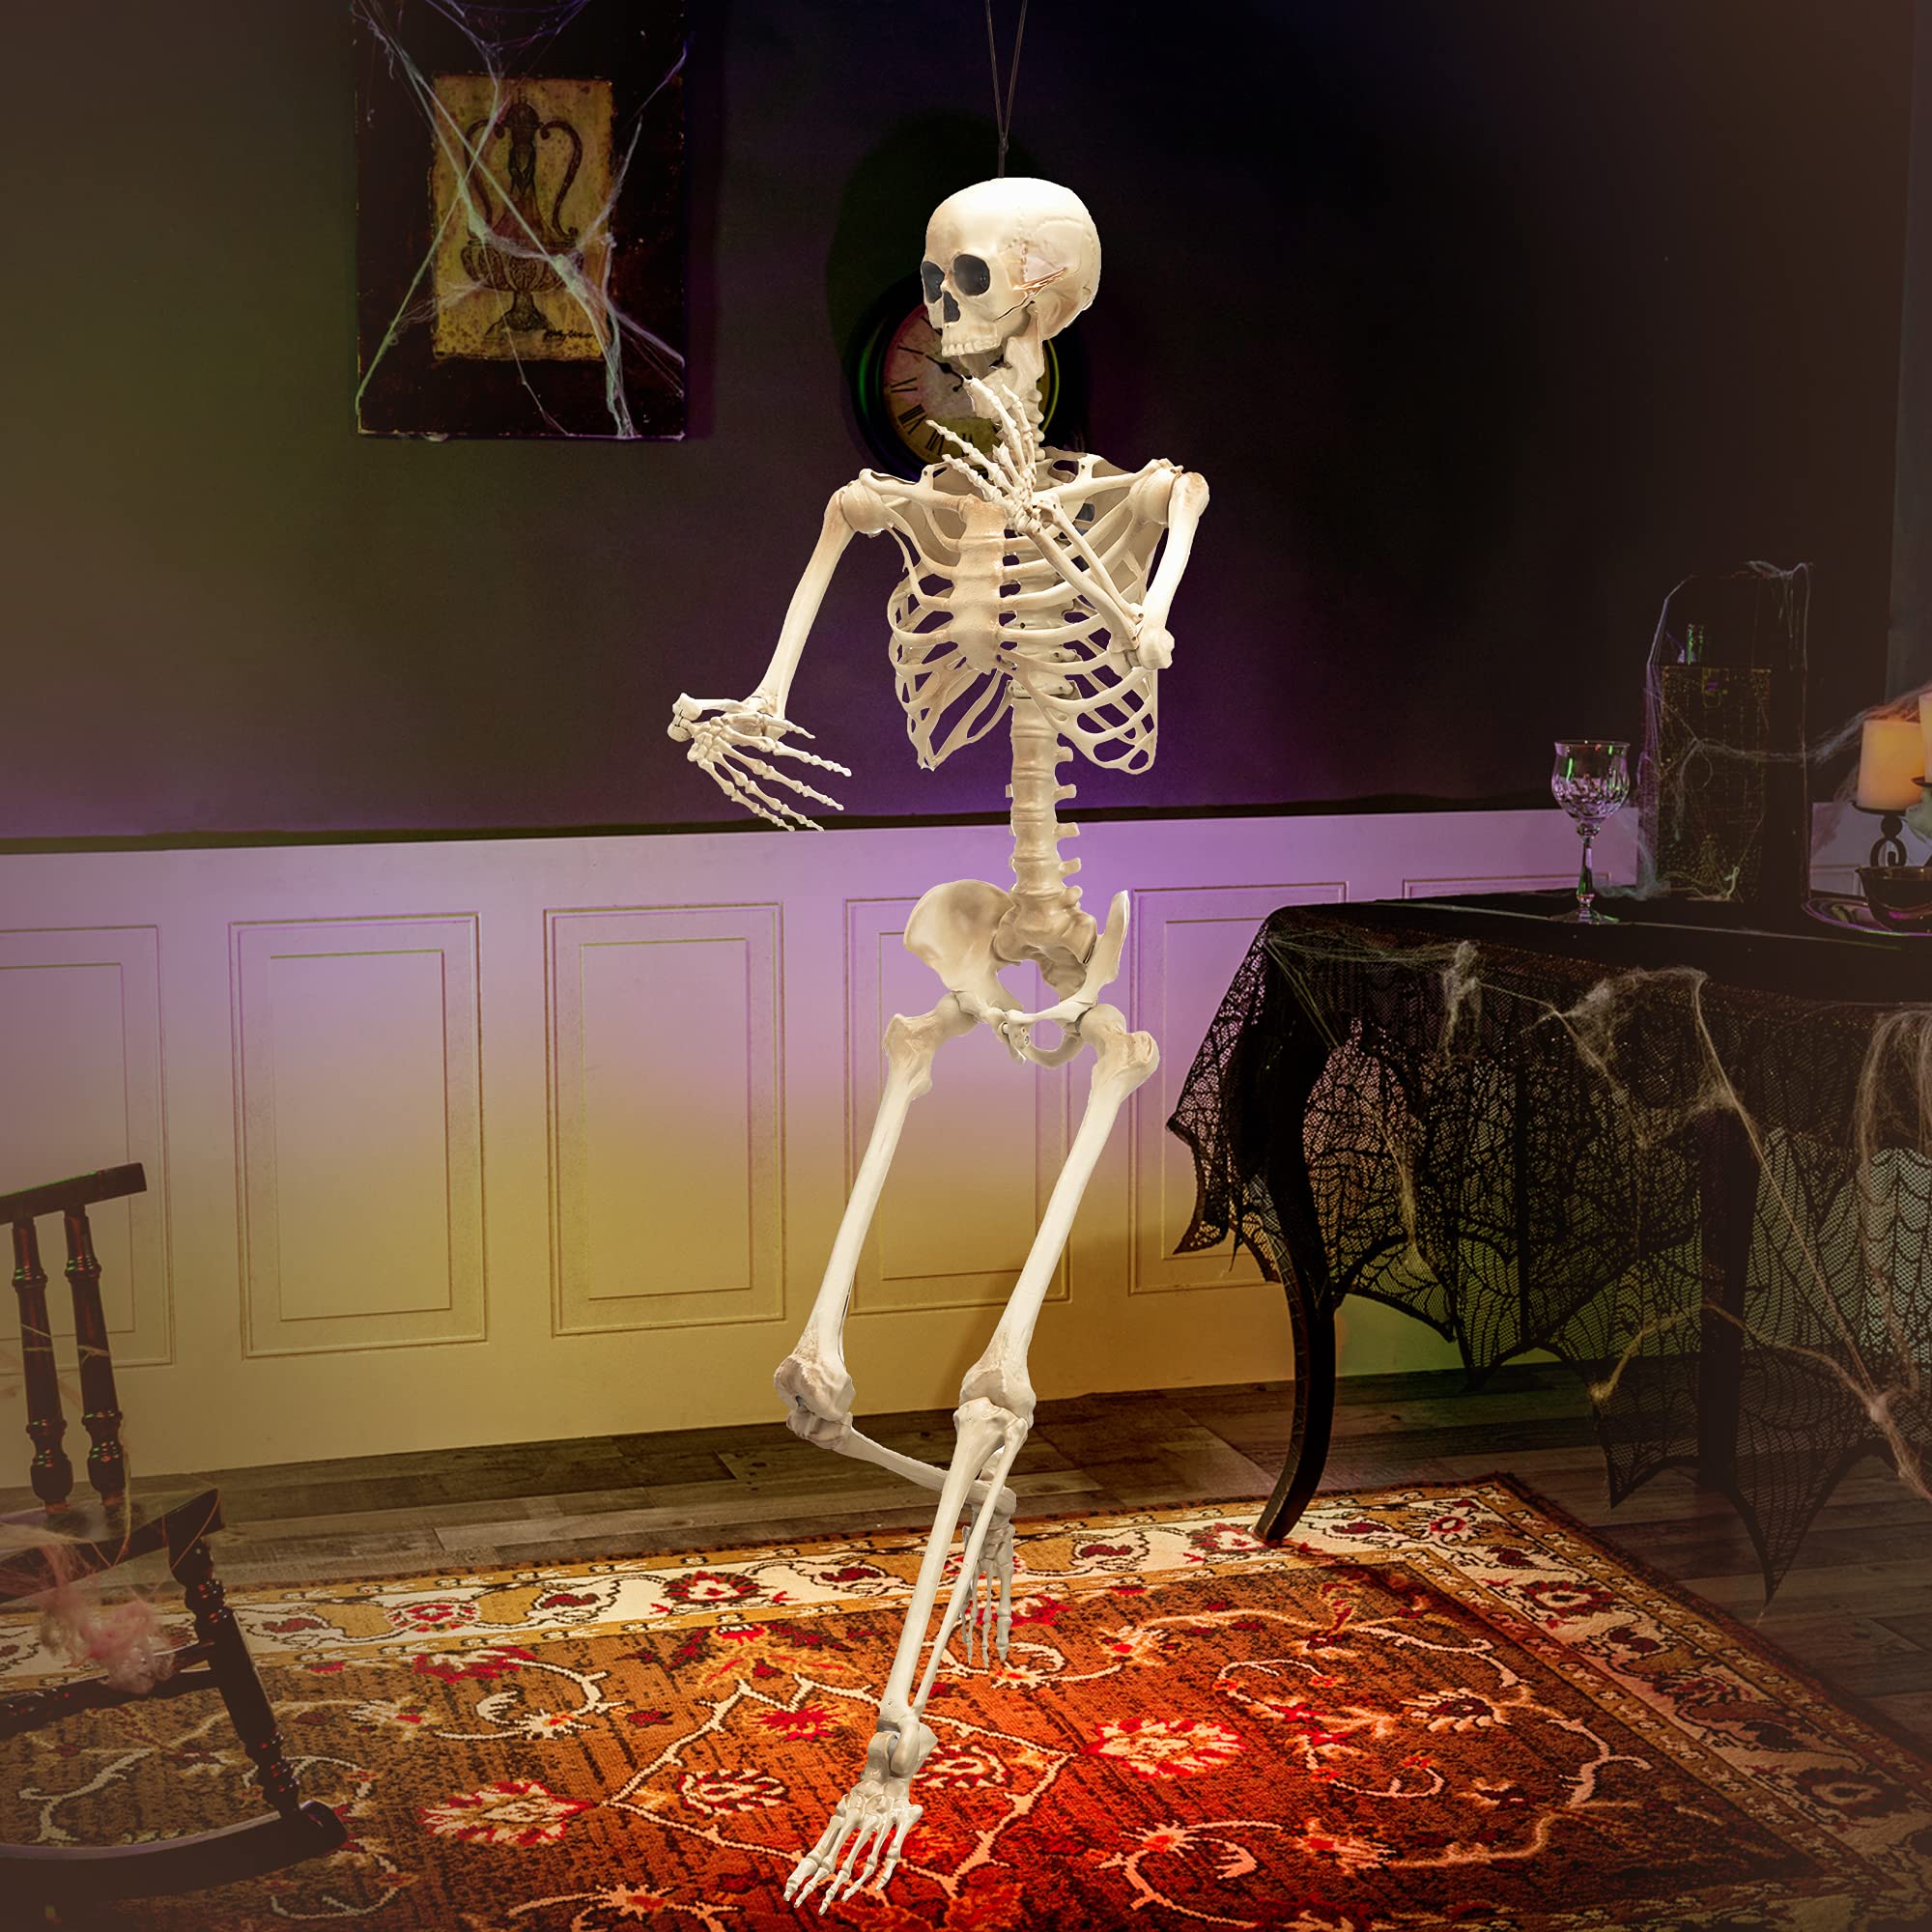 JOYIN 5 ft Halloween Life-Size Skeleton, Full Body Plastic Skeleton with Movable Joint, Human Bones for Halloween Party, Indoor and Outdoor Decorations, Haunted House or Graveyard Props